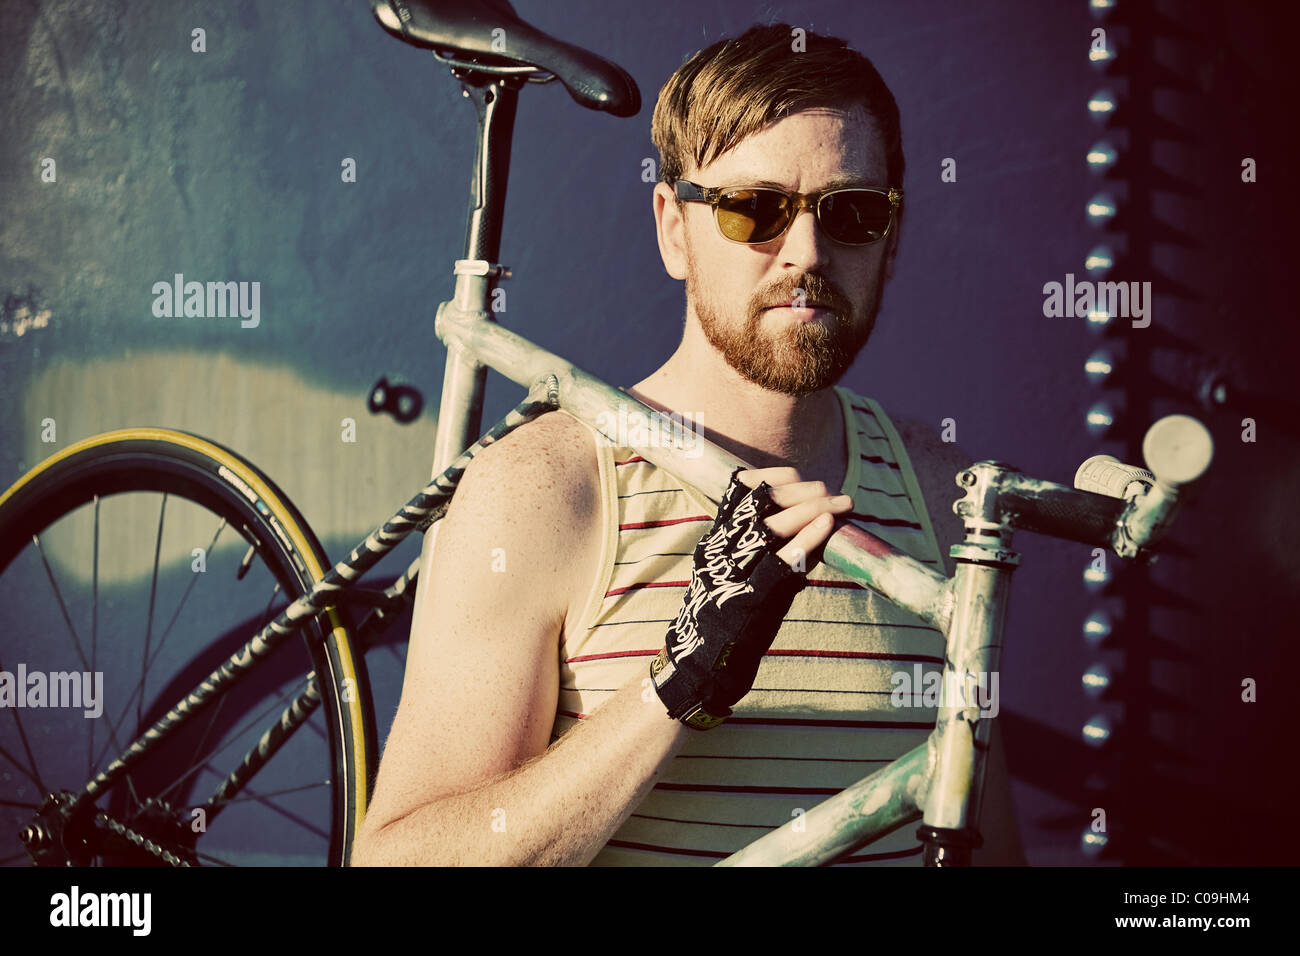 A fixed gear rider in a yellow striped tank top and sunglasses poses. Stock Photo